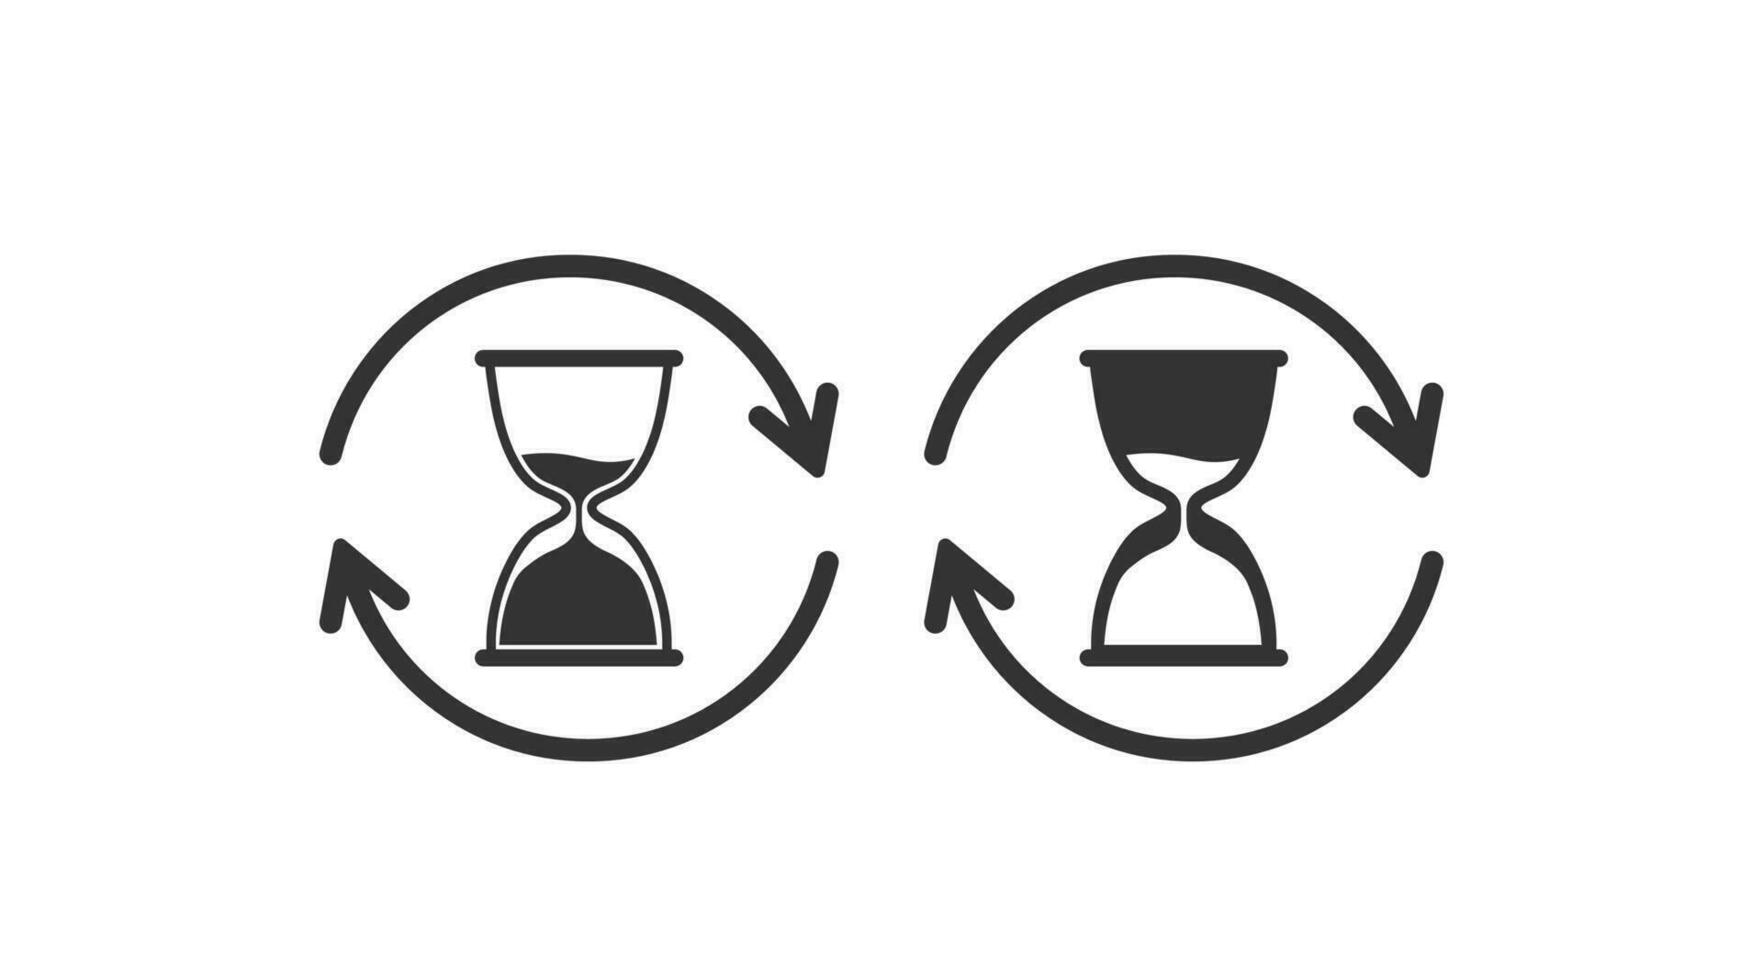 Refresh hourglass icon. Repeat of history illustration symbol. Sign repeat time vector